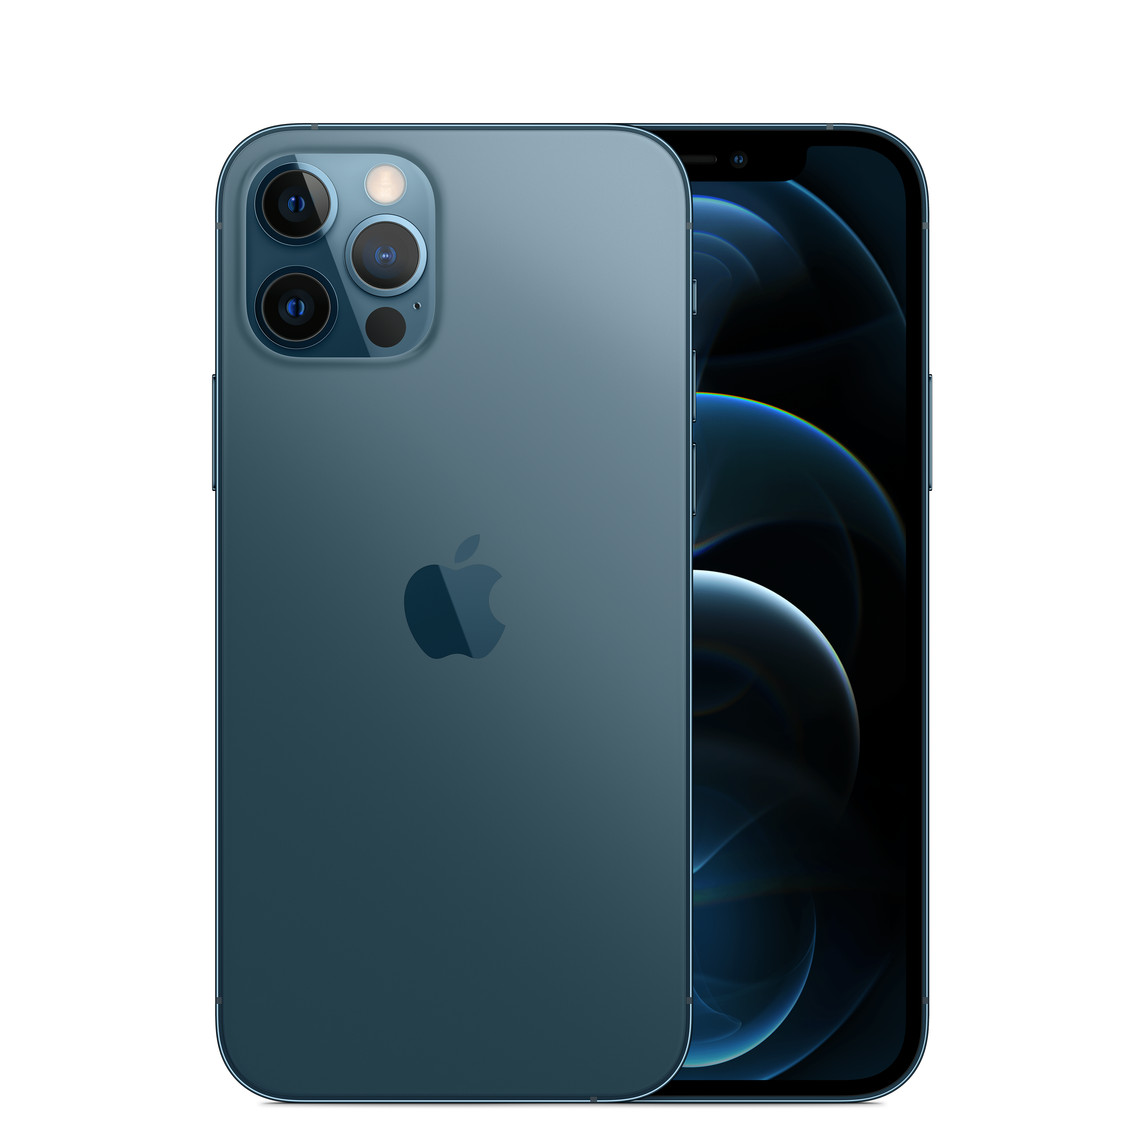 Back, blue iPhone 12, Pro camera system with True Tone flash. Front, all-screen display